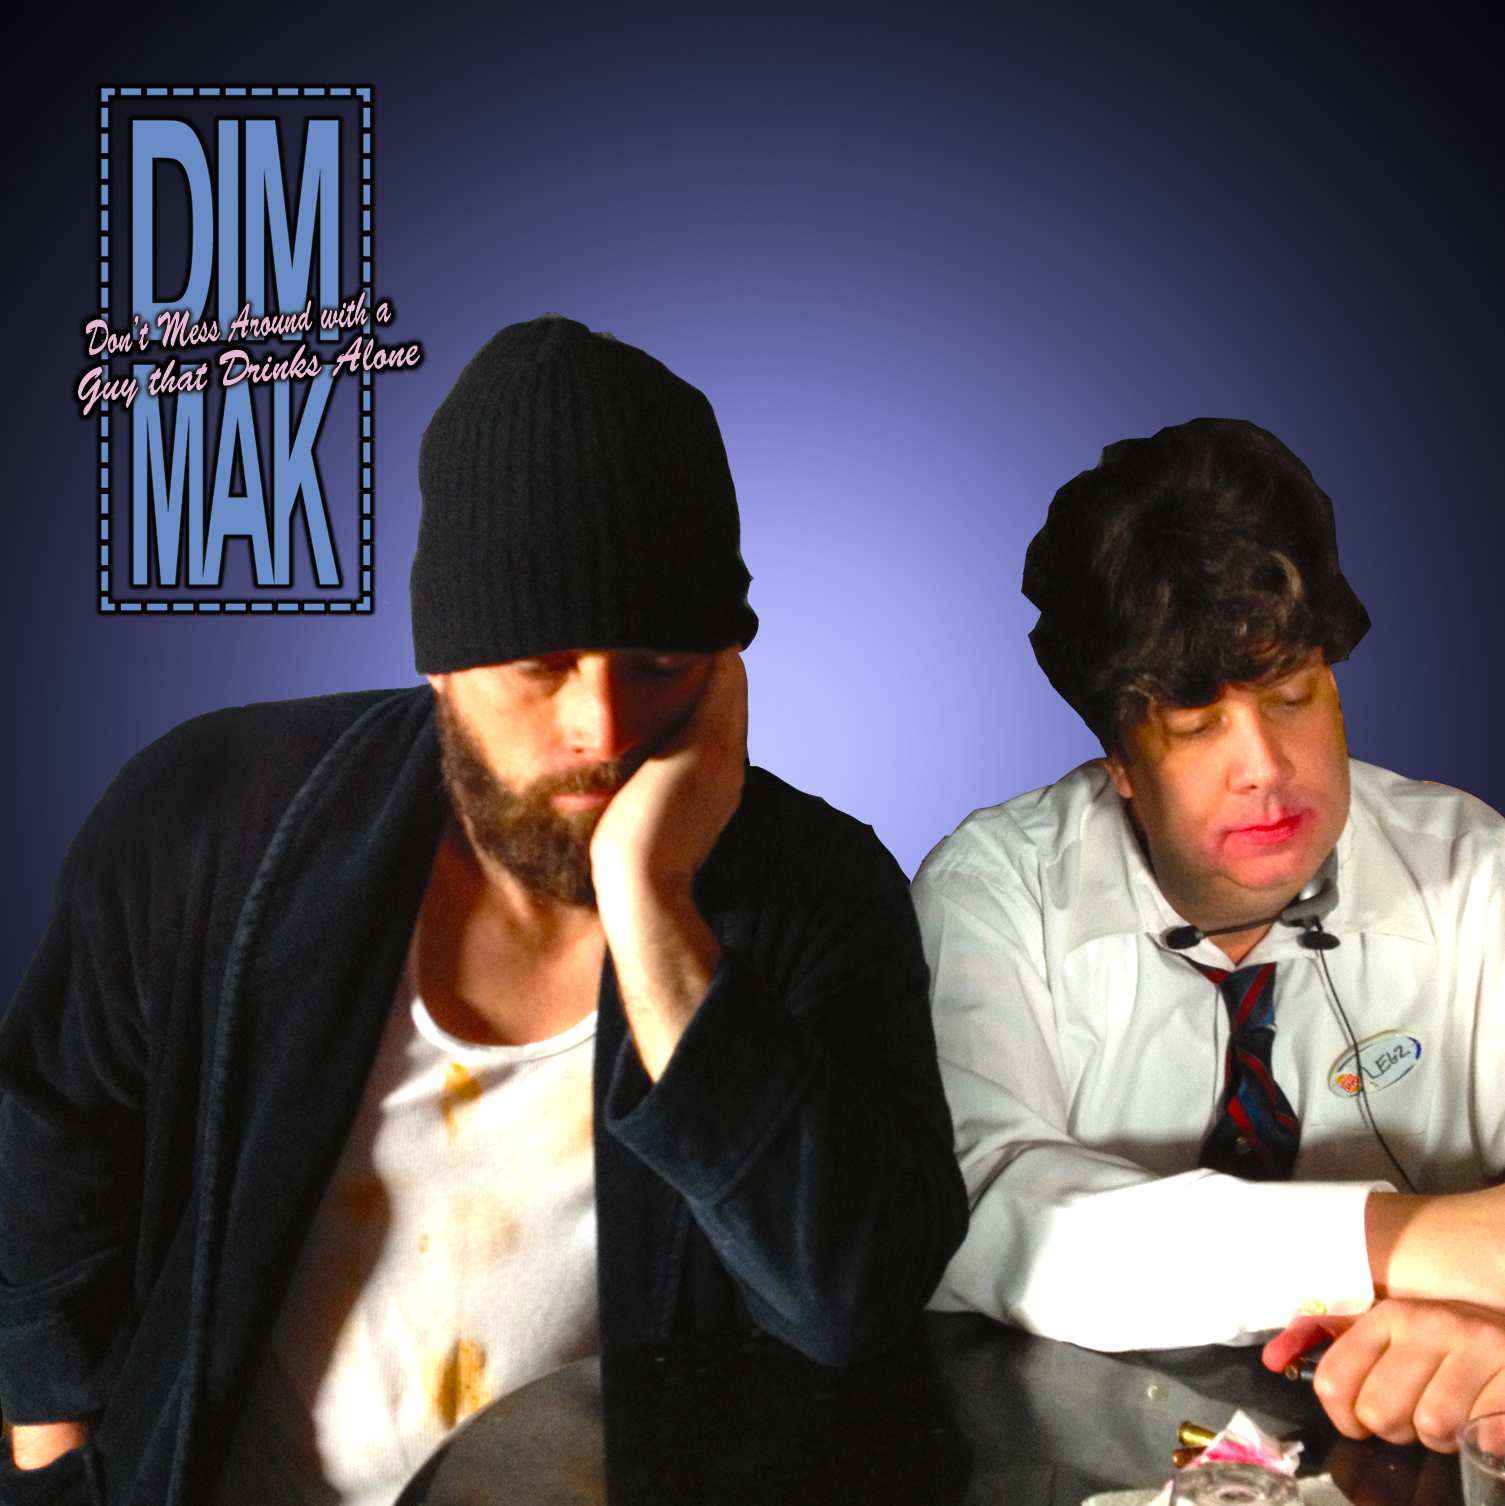 Don't Mess Around With A Guy That Drinks Alone by Project Dim Mak single cover